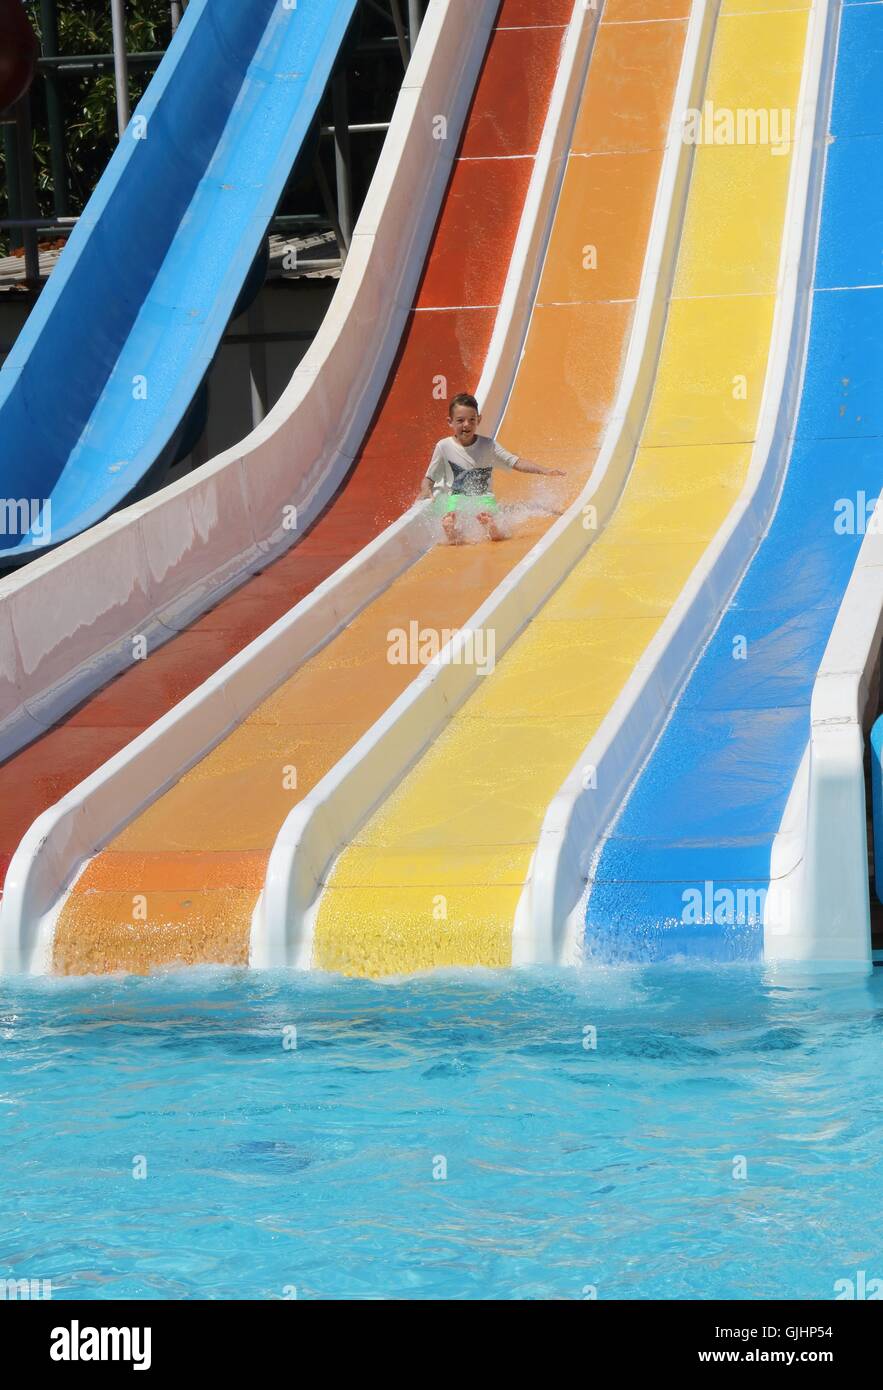 https://c8.alamy.com/comp/GJHP54/a-young-english-boy-having-fun-on-a-water-slide-in-a-waterpark-while-GJHP54.jpg